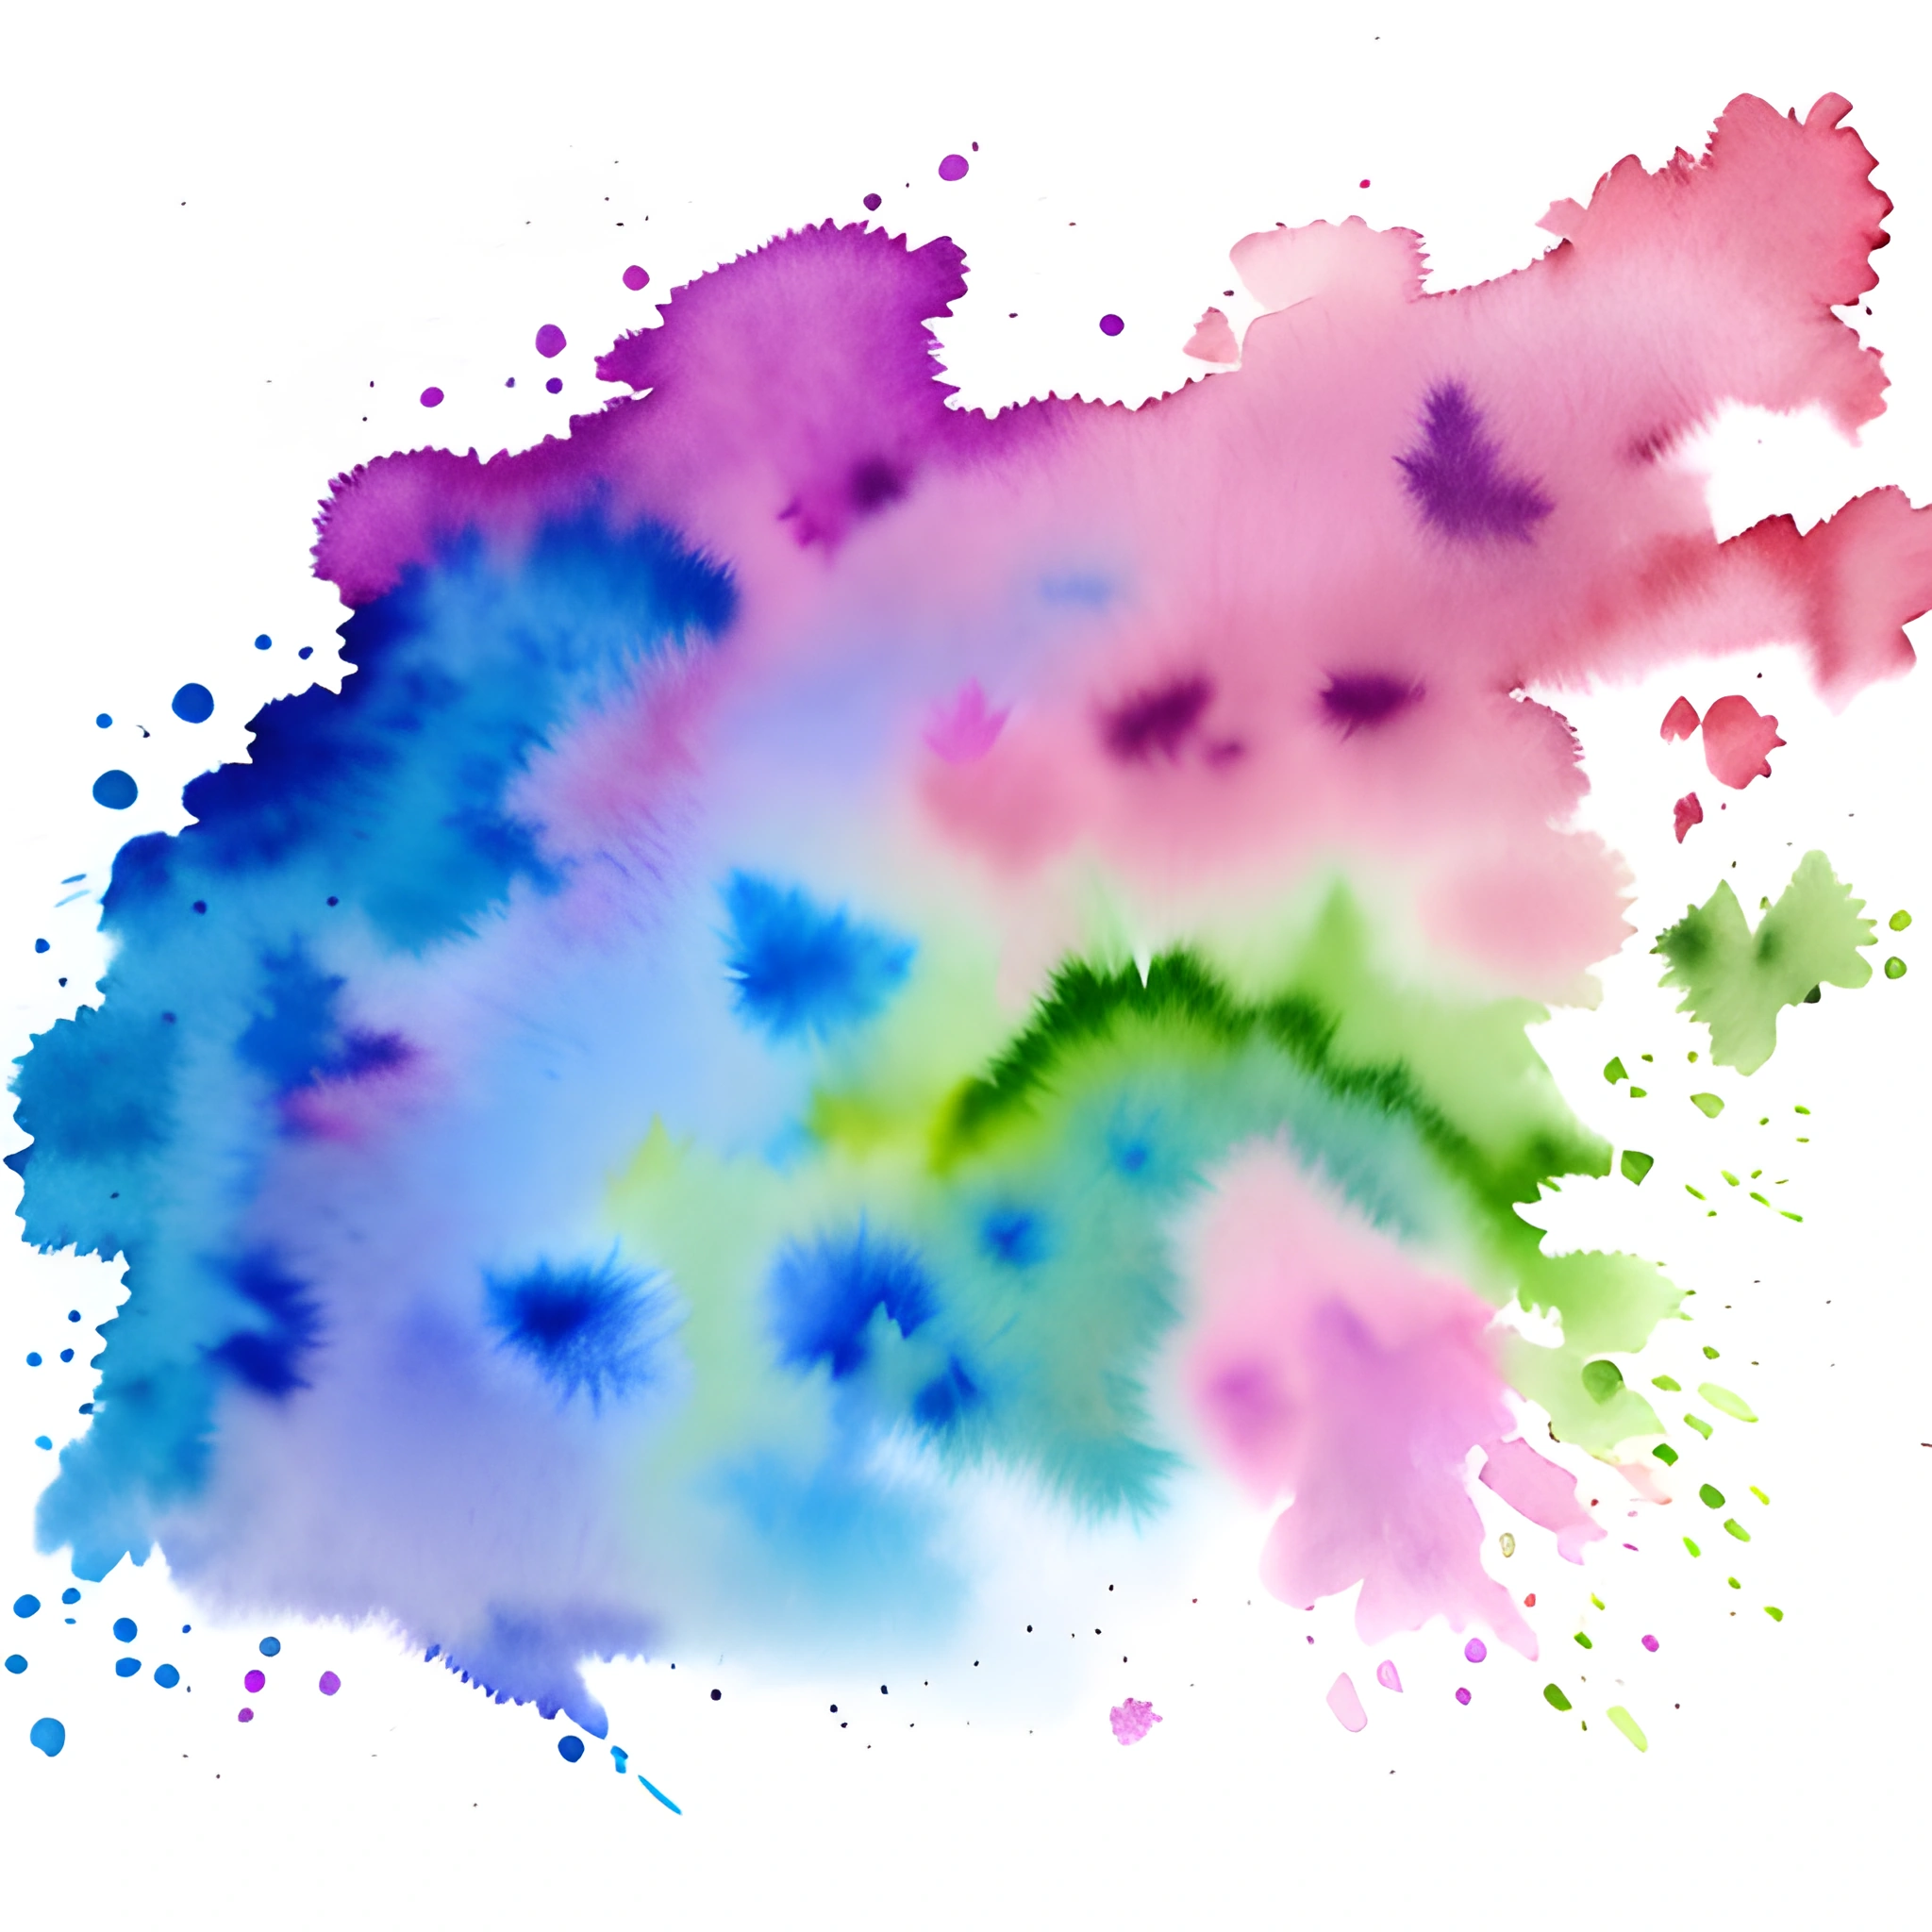 a brightly colored watercolor splash painting on a white background